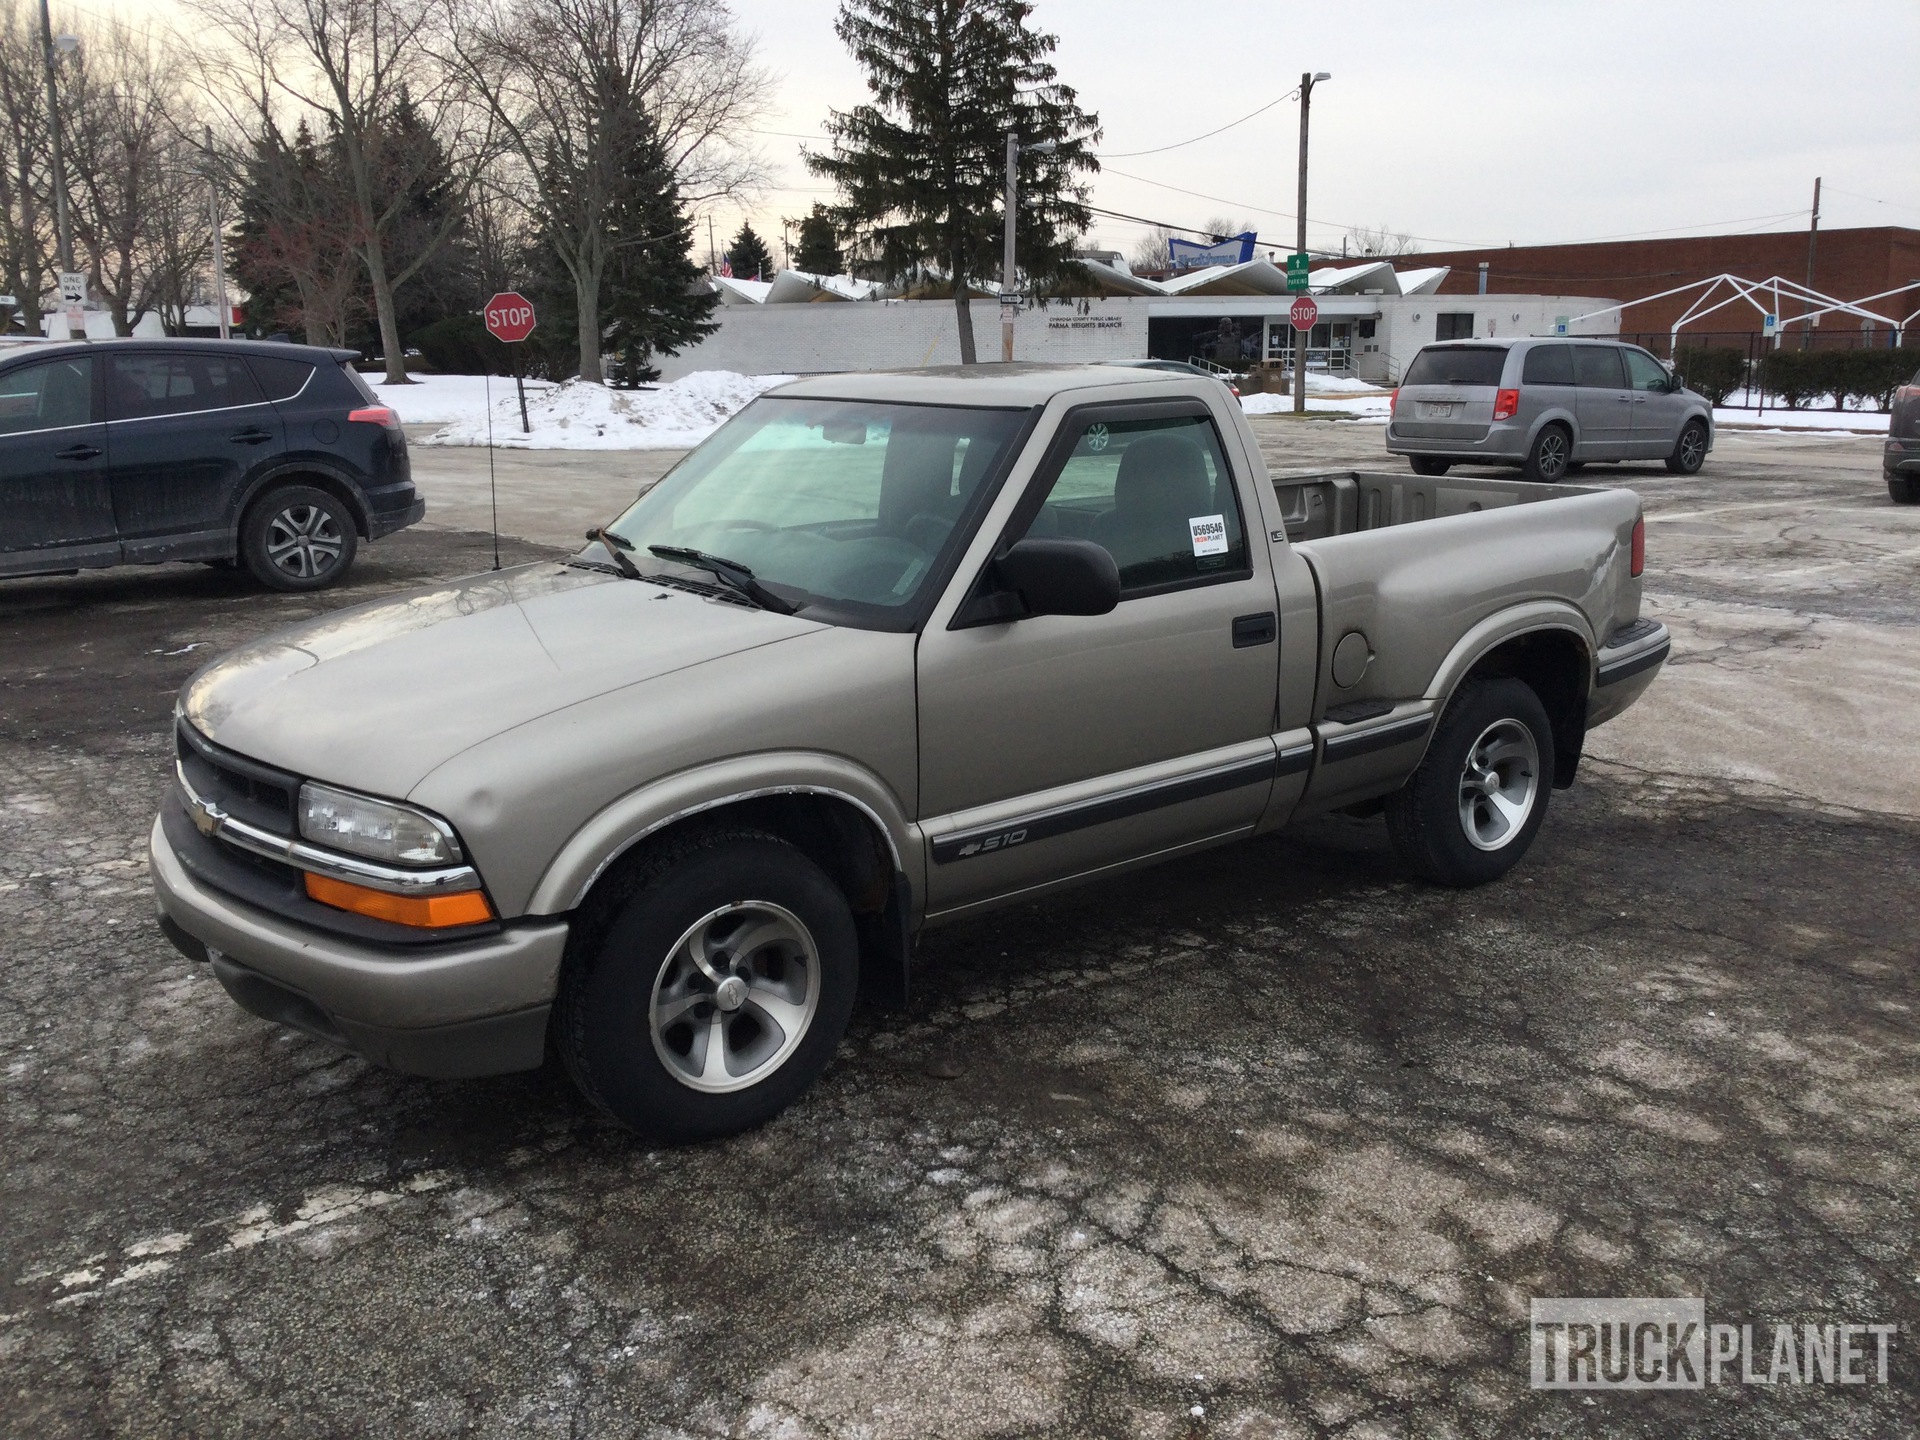 2000 Chevrolet S10 LS 4x2 Regular Cab Pickup in Parma Heights, Ohio, United  States (TruckPlanet Item #6114420)